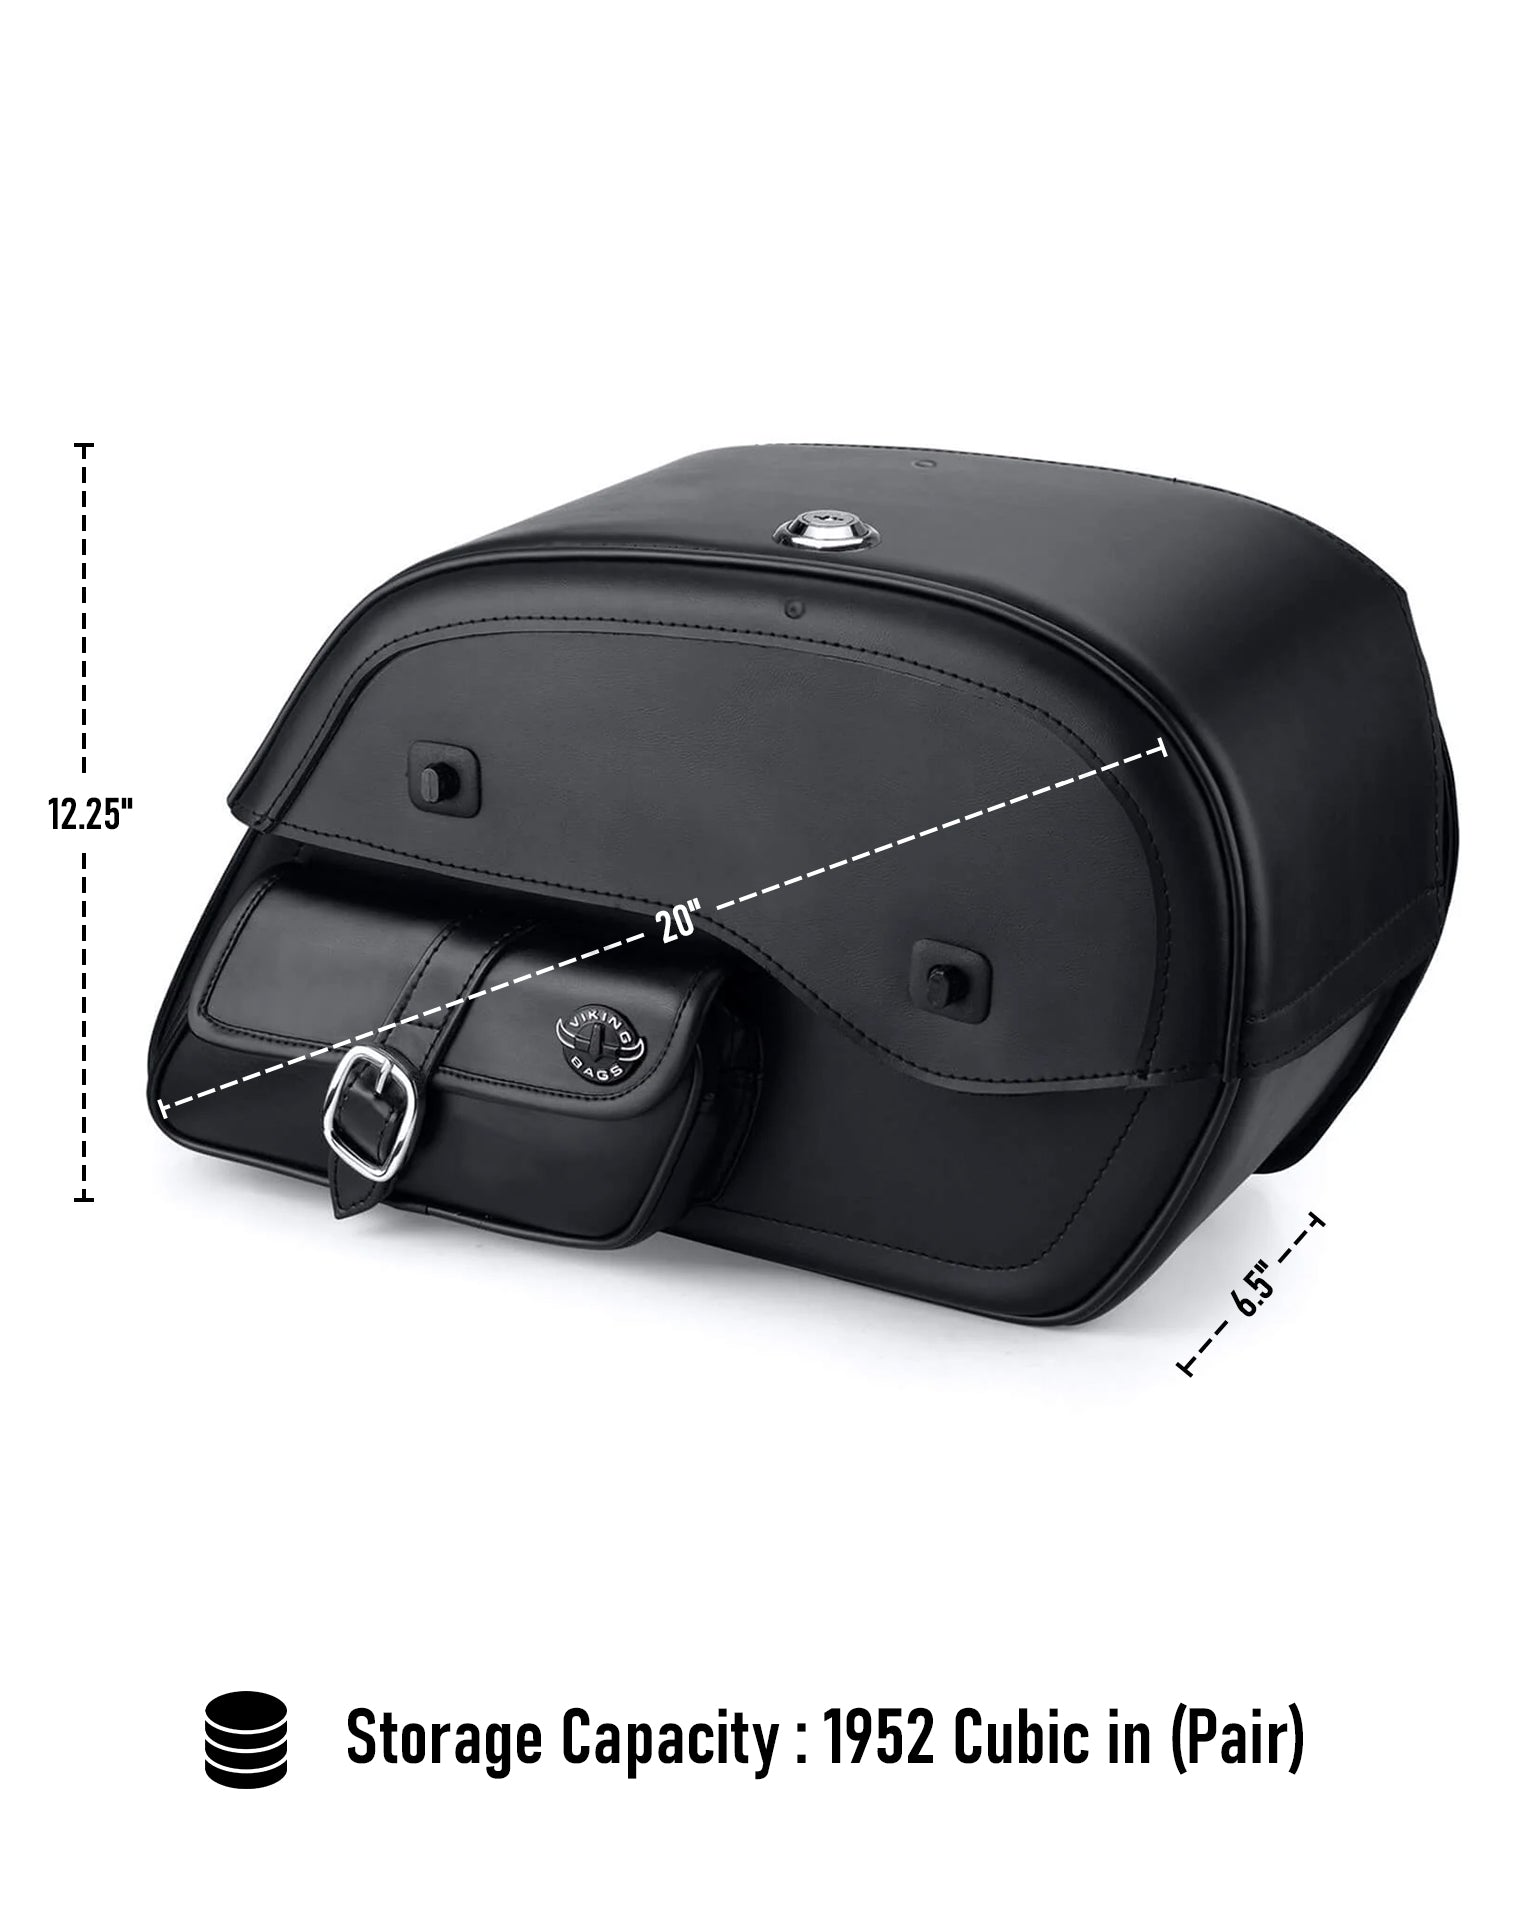 Viking Essential Side Pocket Large Hyosung Aquila Gv 250 Leather Motorcycle Saddlebags Can Store Your Ridings Gears